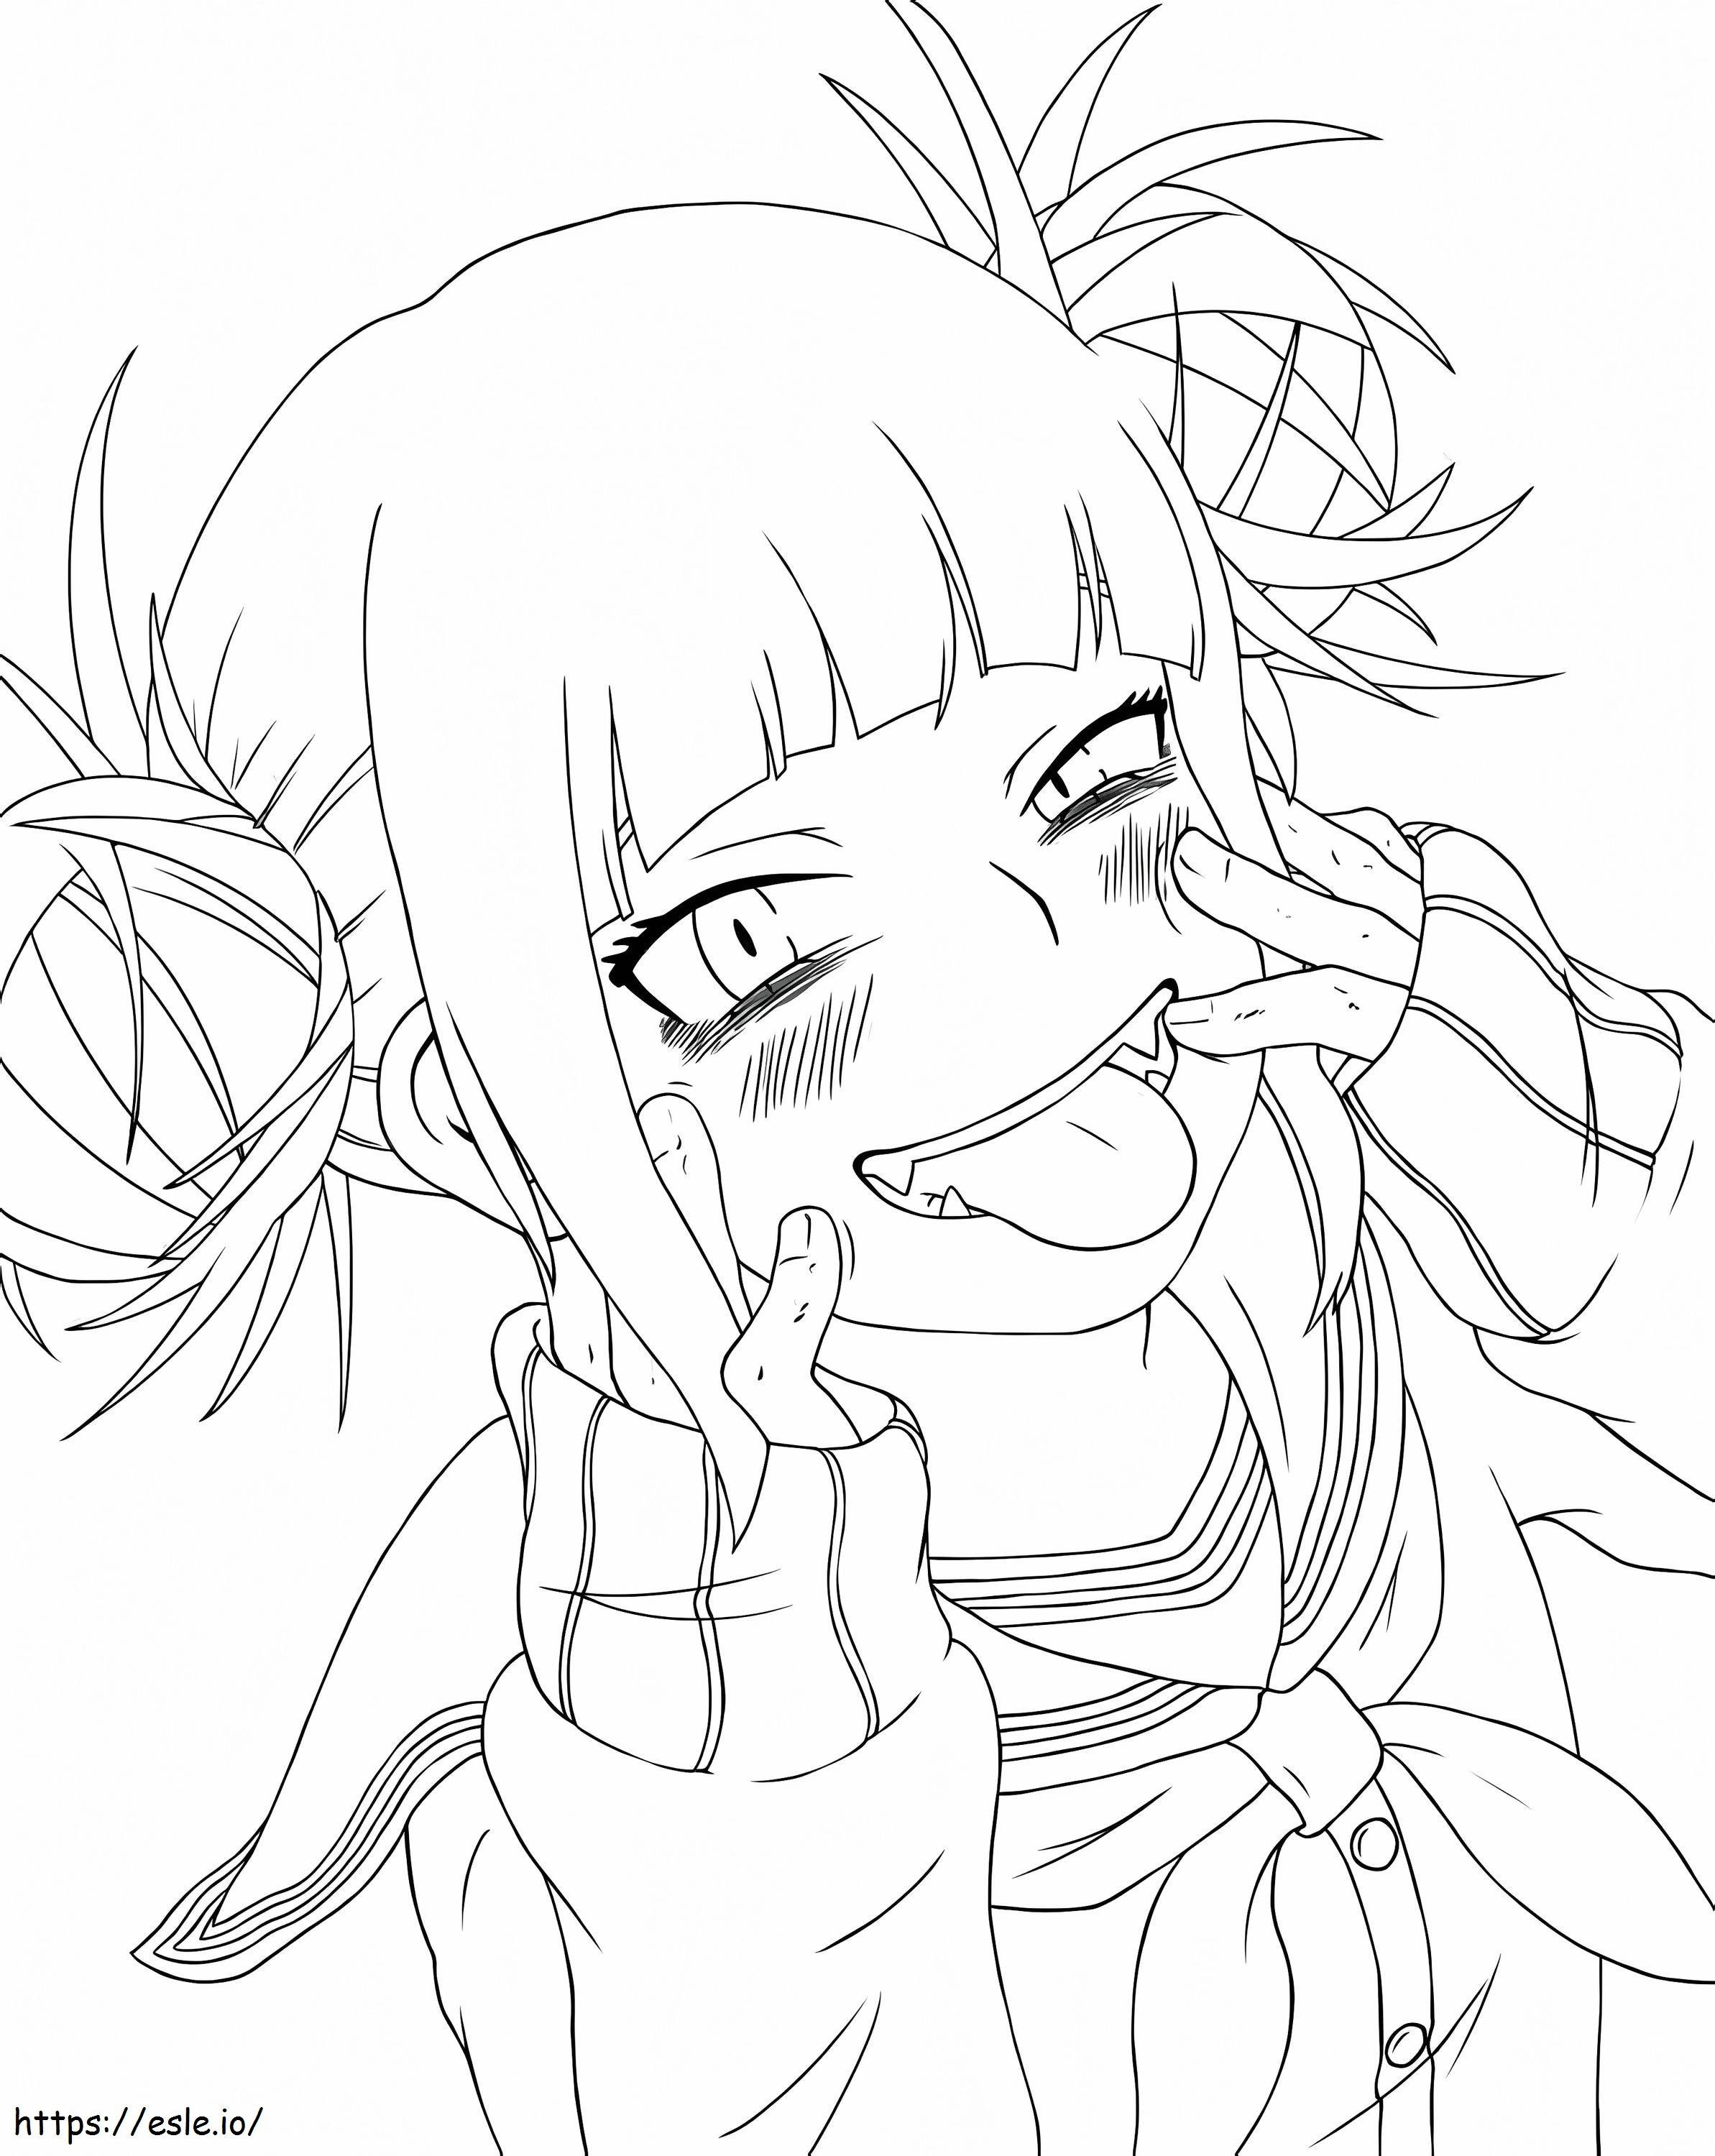 Toga Himiko My Hero Academy coloring page